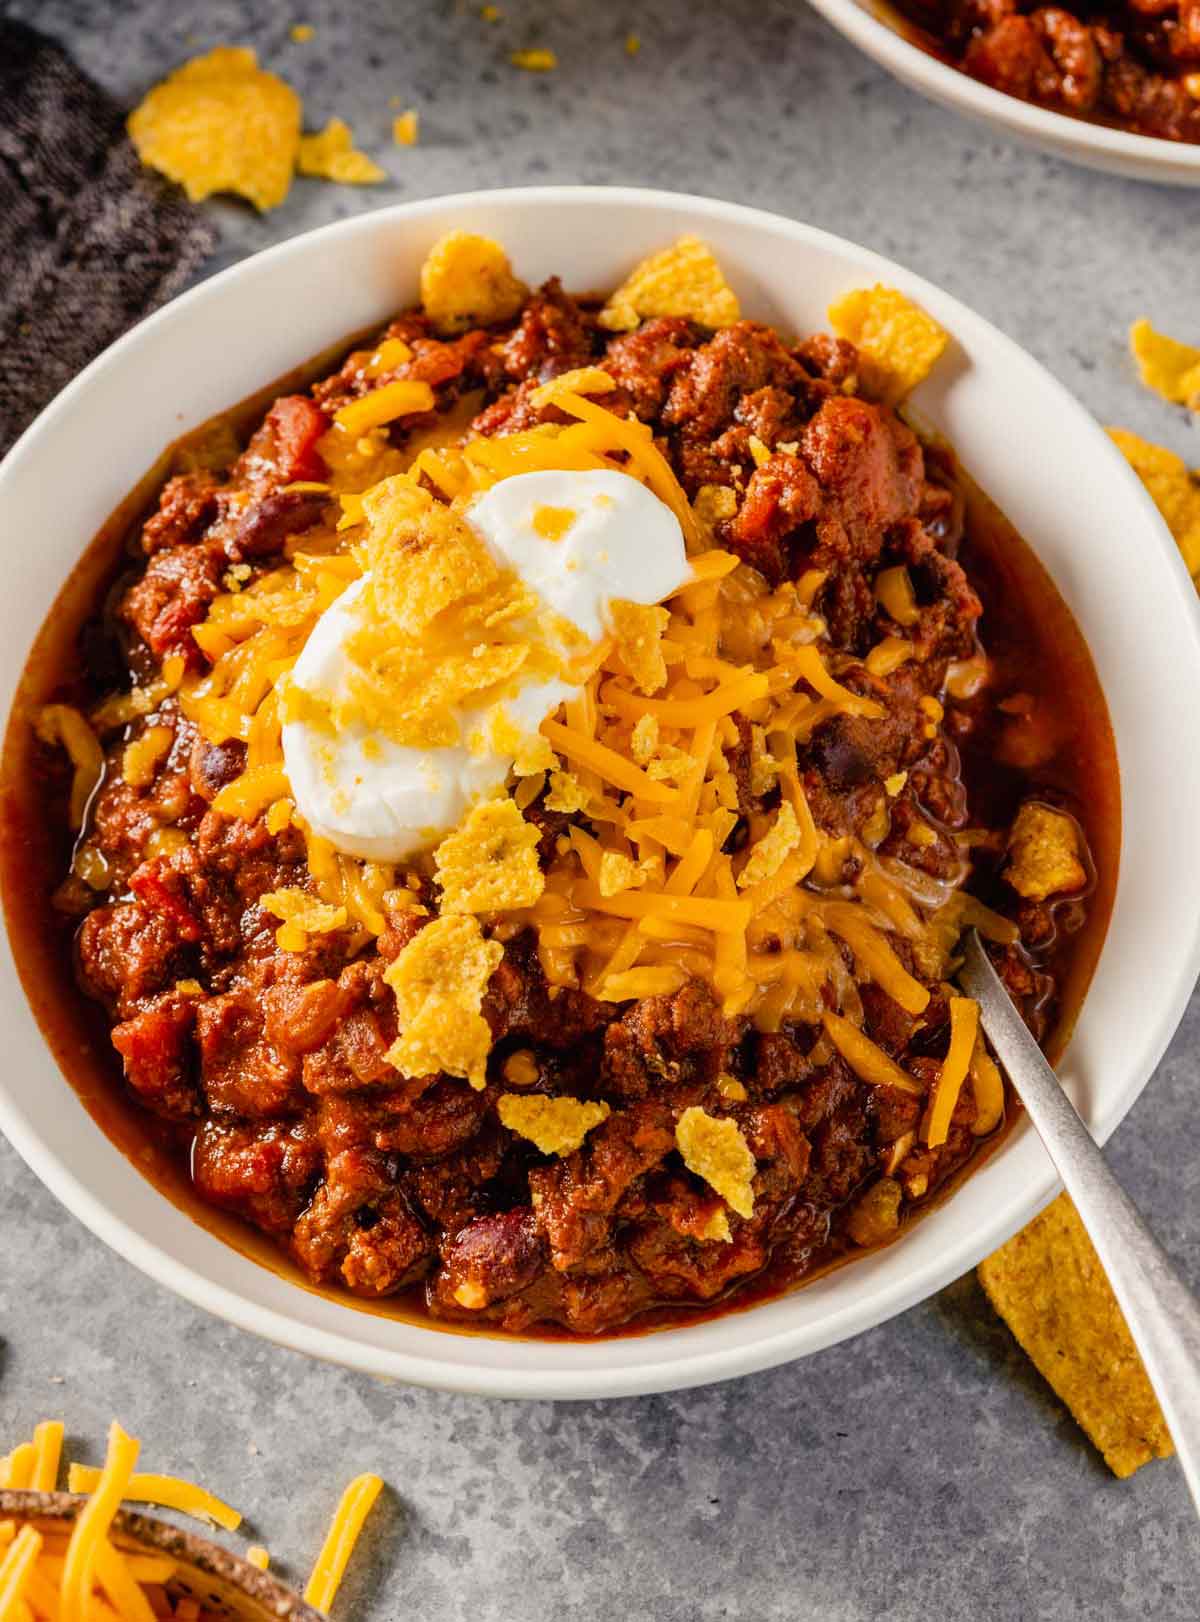 Wendy's Chili at Home: Easy Recipe and Serving Ideas